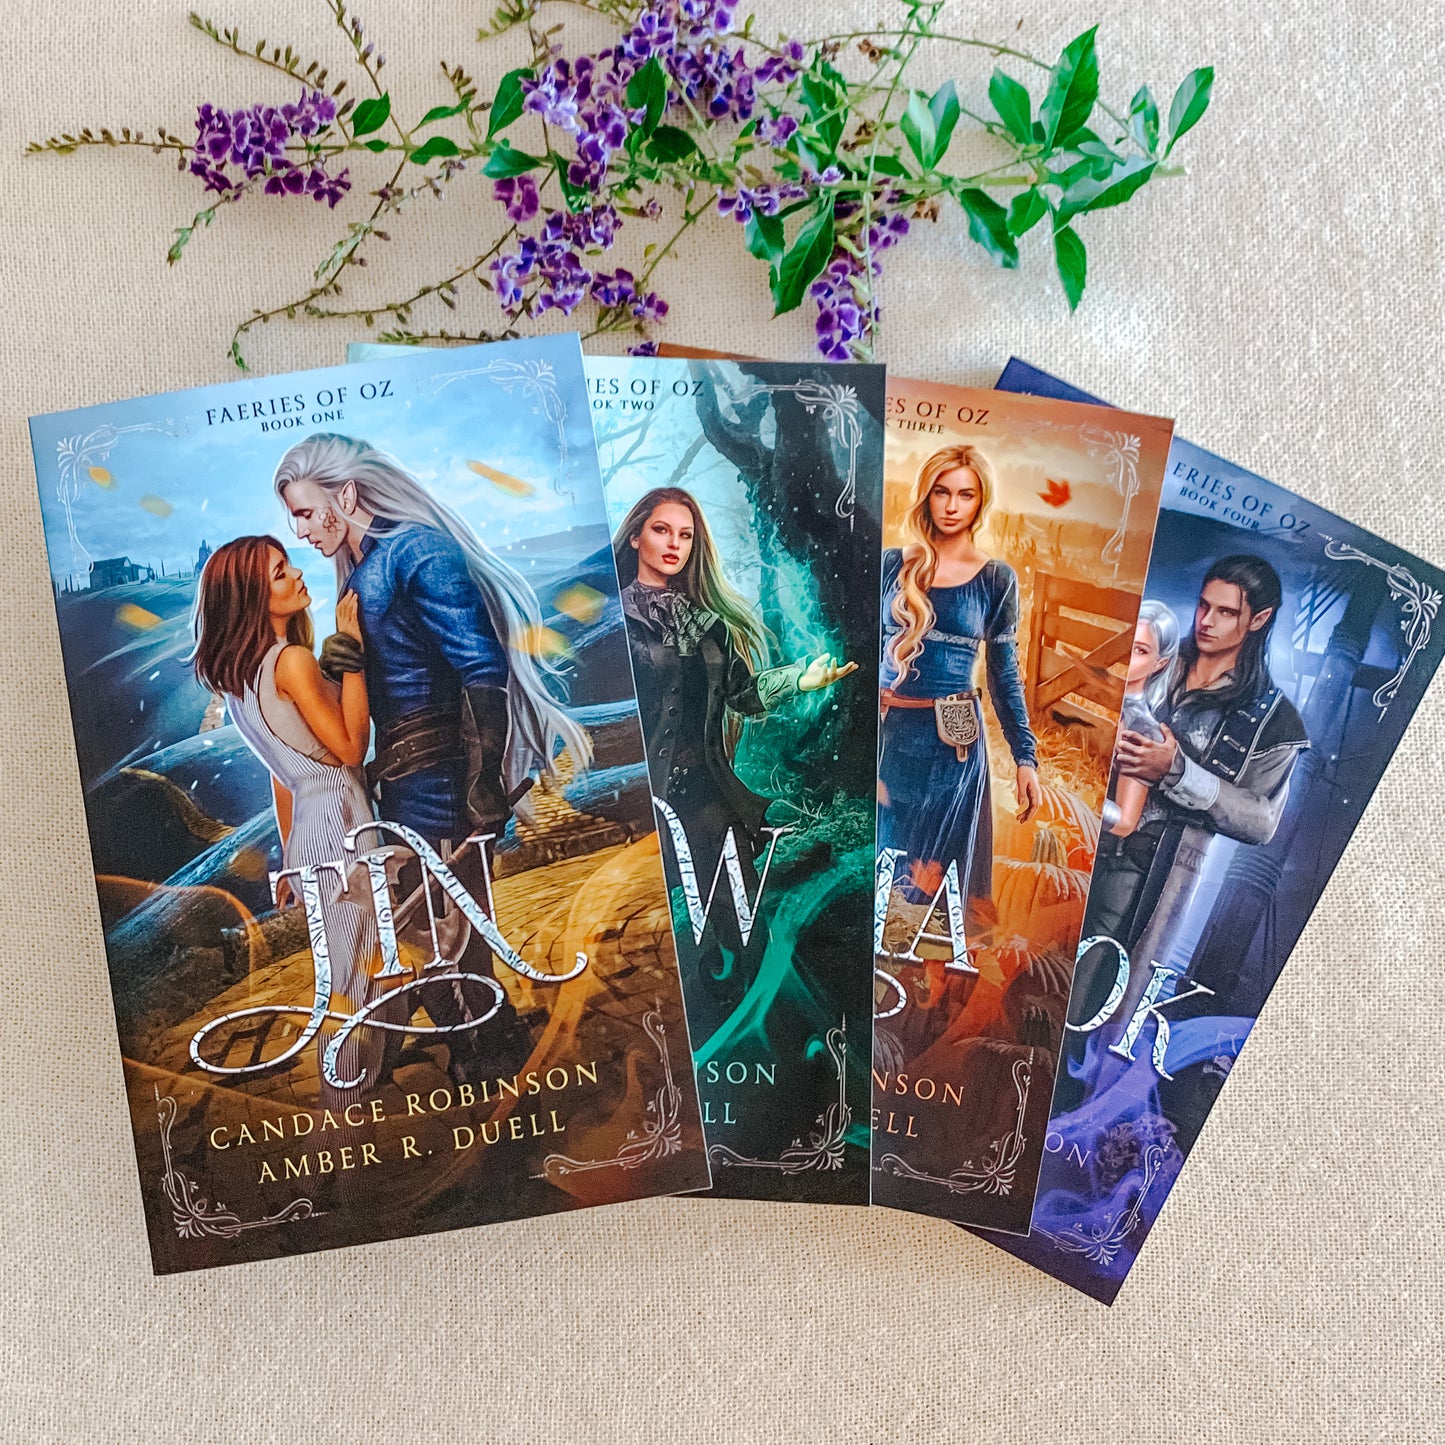 Faeries of Oz Series by Candace Robinson & Amber R. Duell